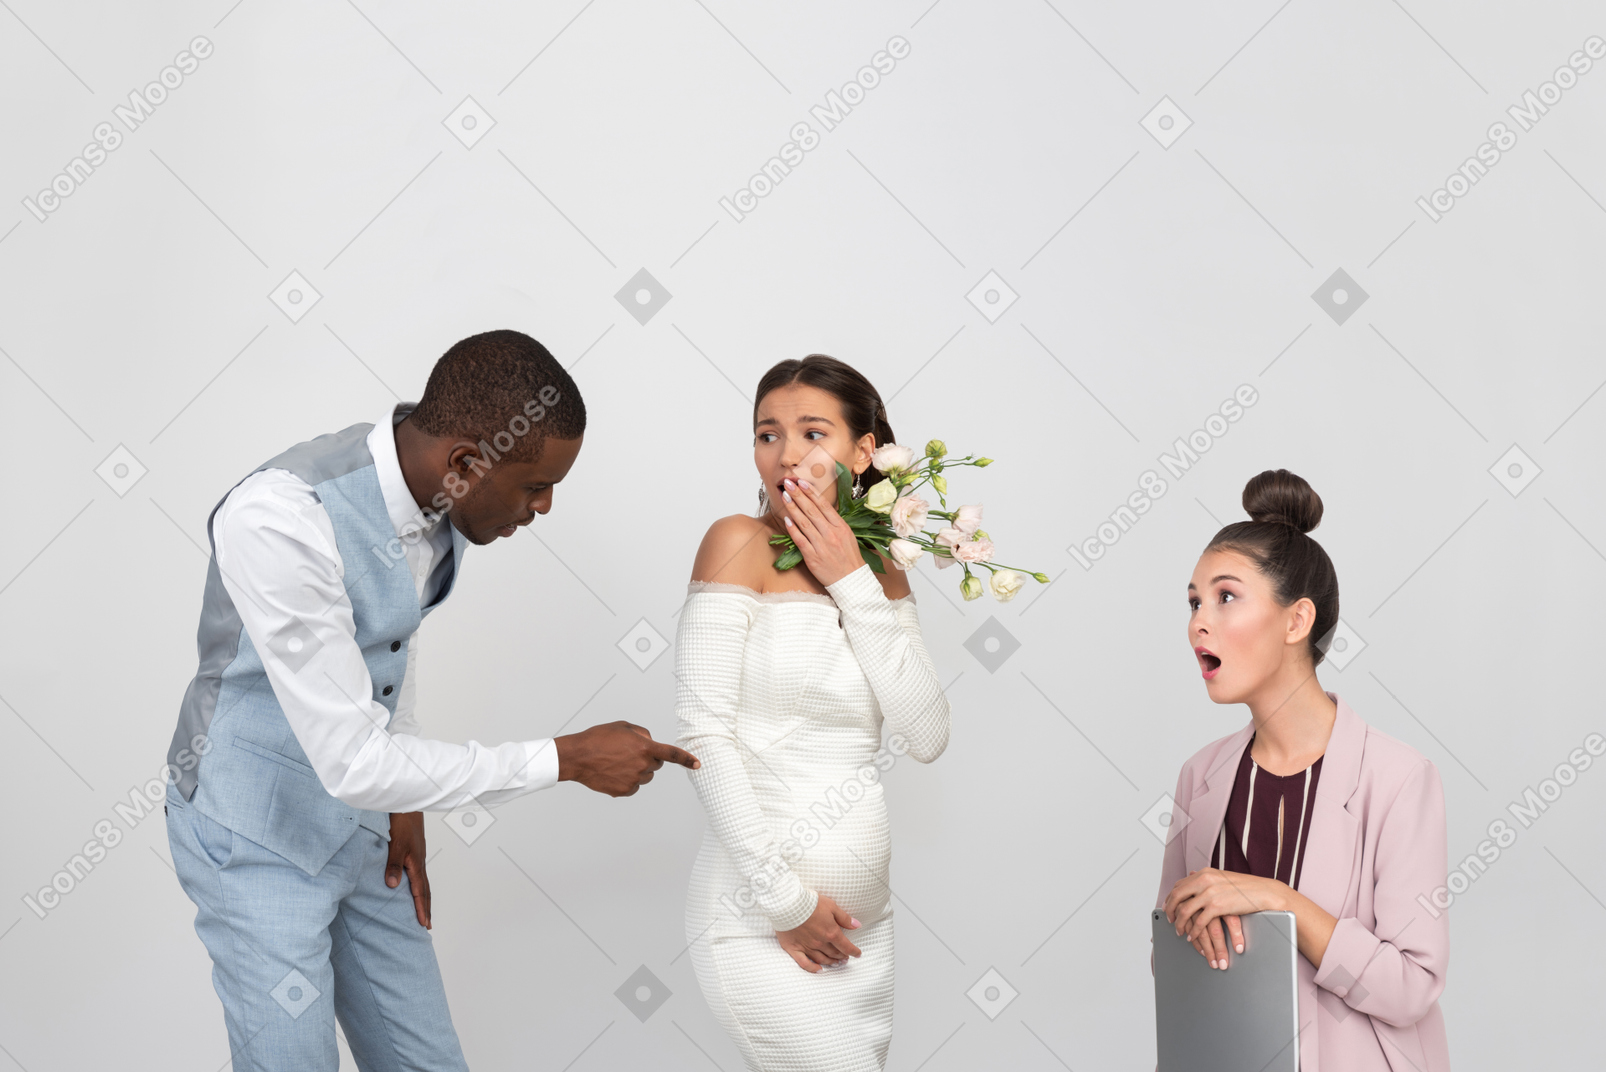 It's not a wedding day only